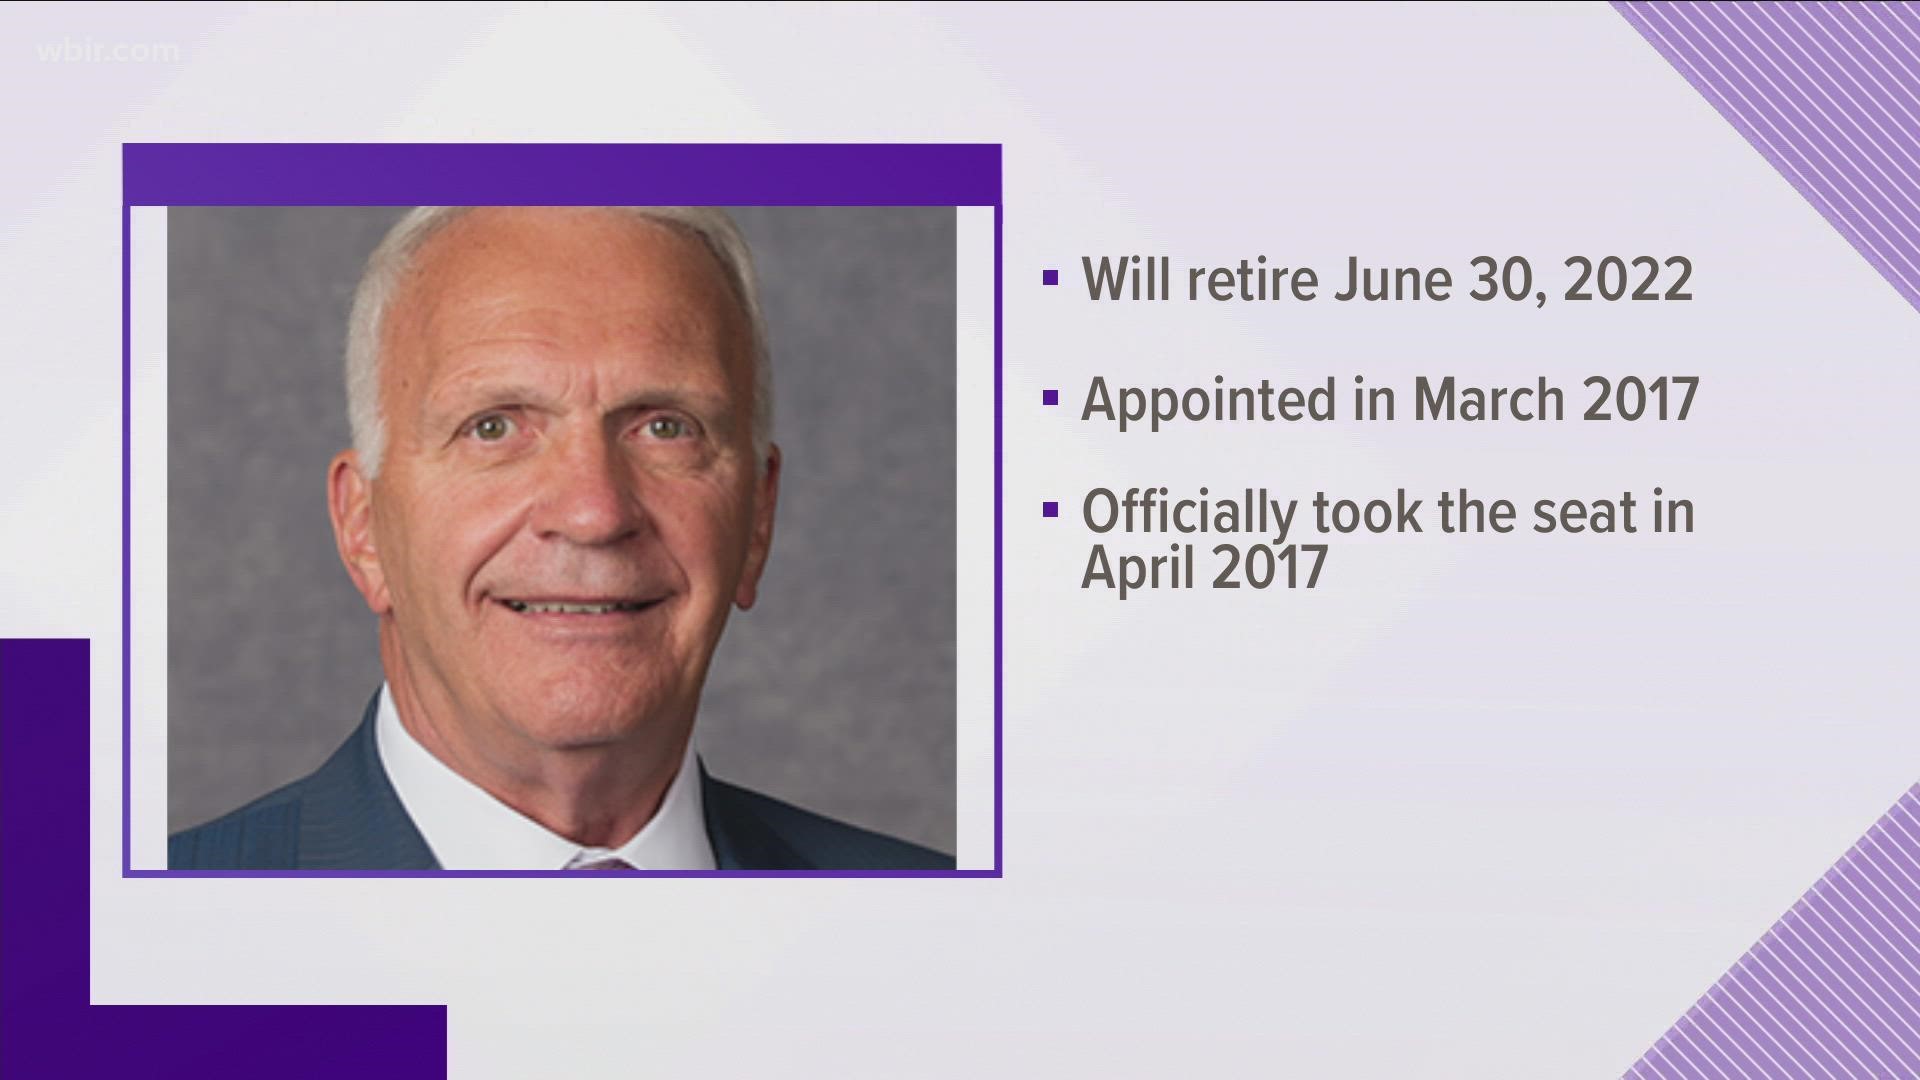 Knox County Schools Superintendent Bob Thomas said that he plans on retiring from the position on June 20, 2022.